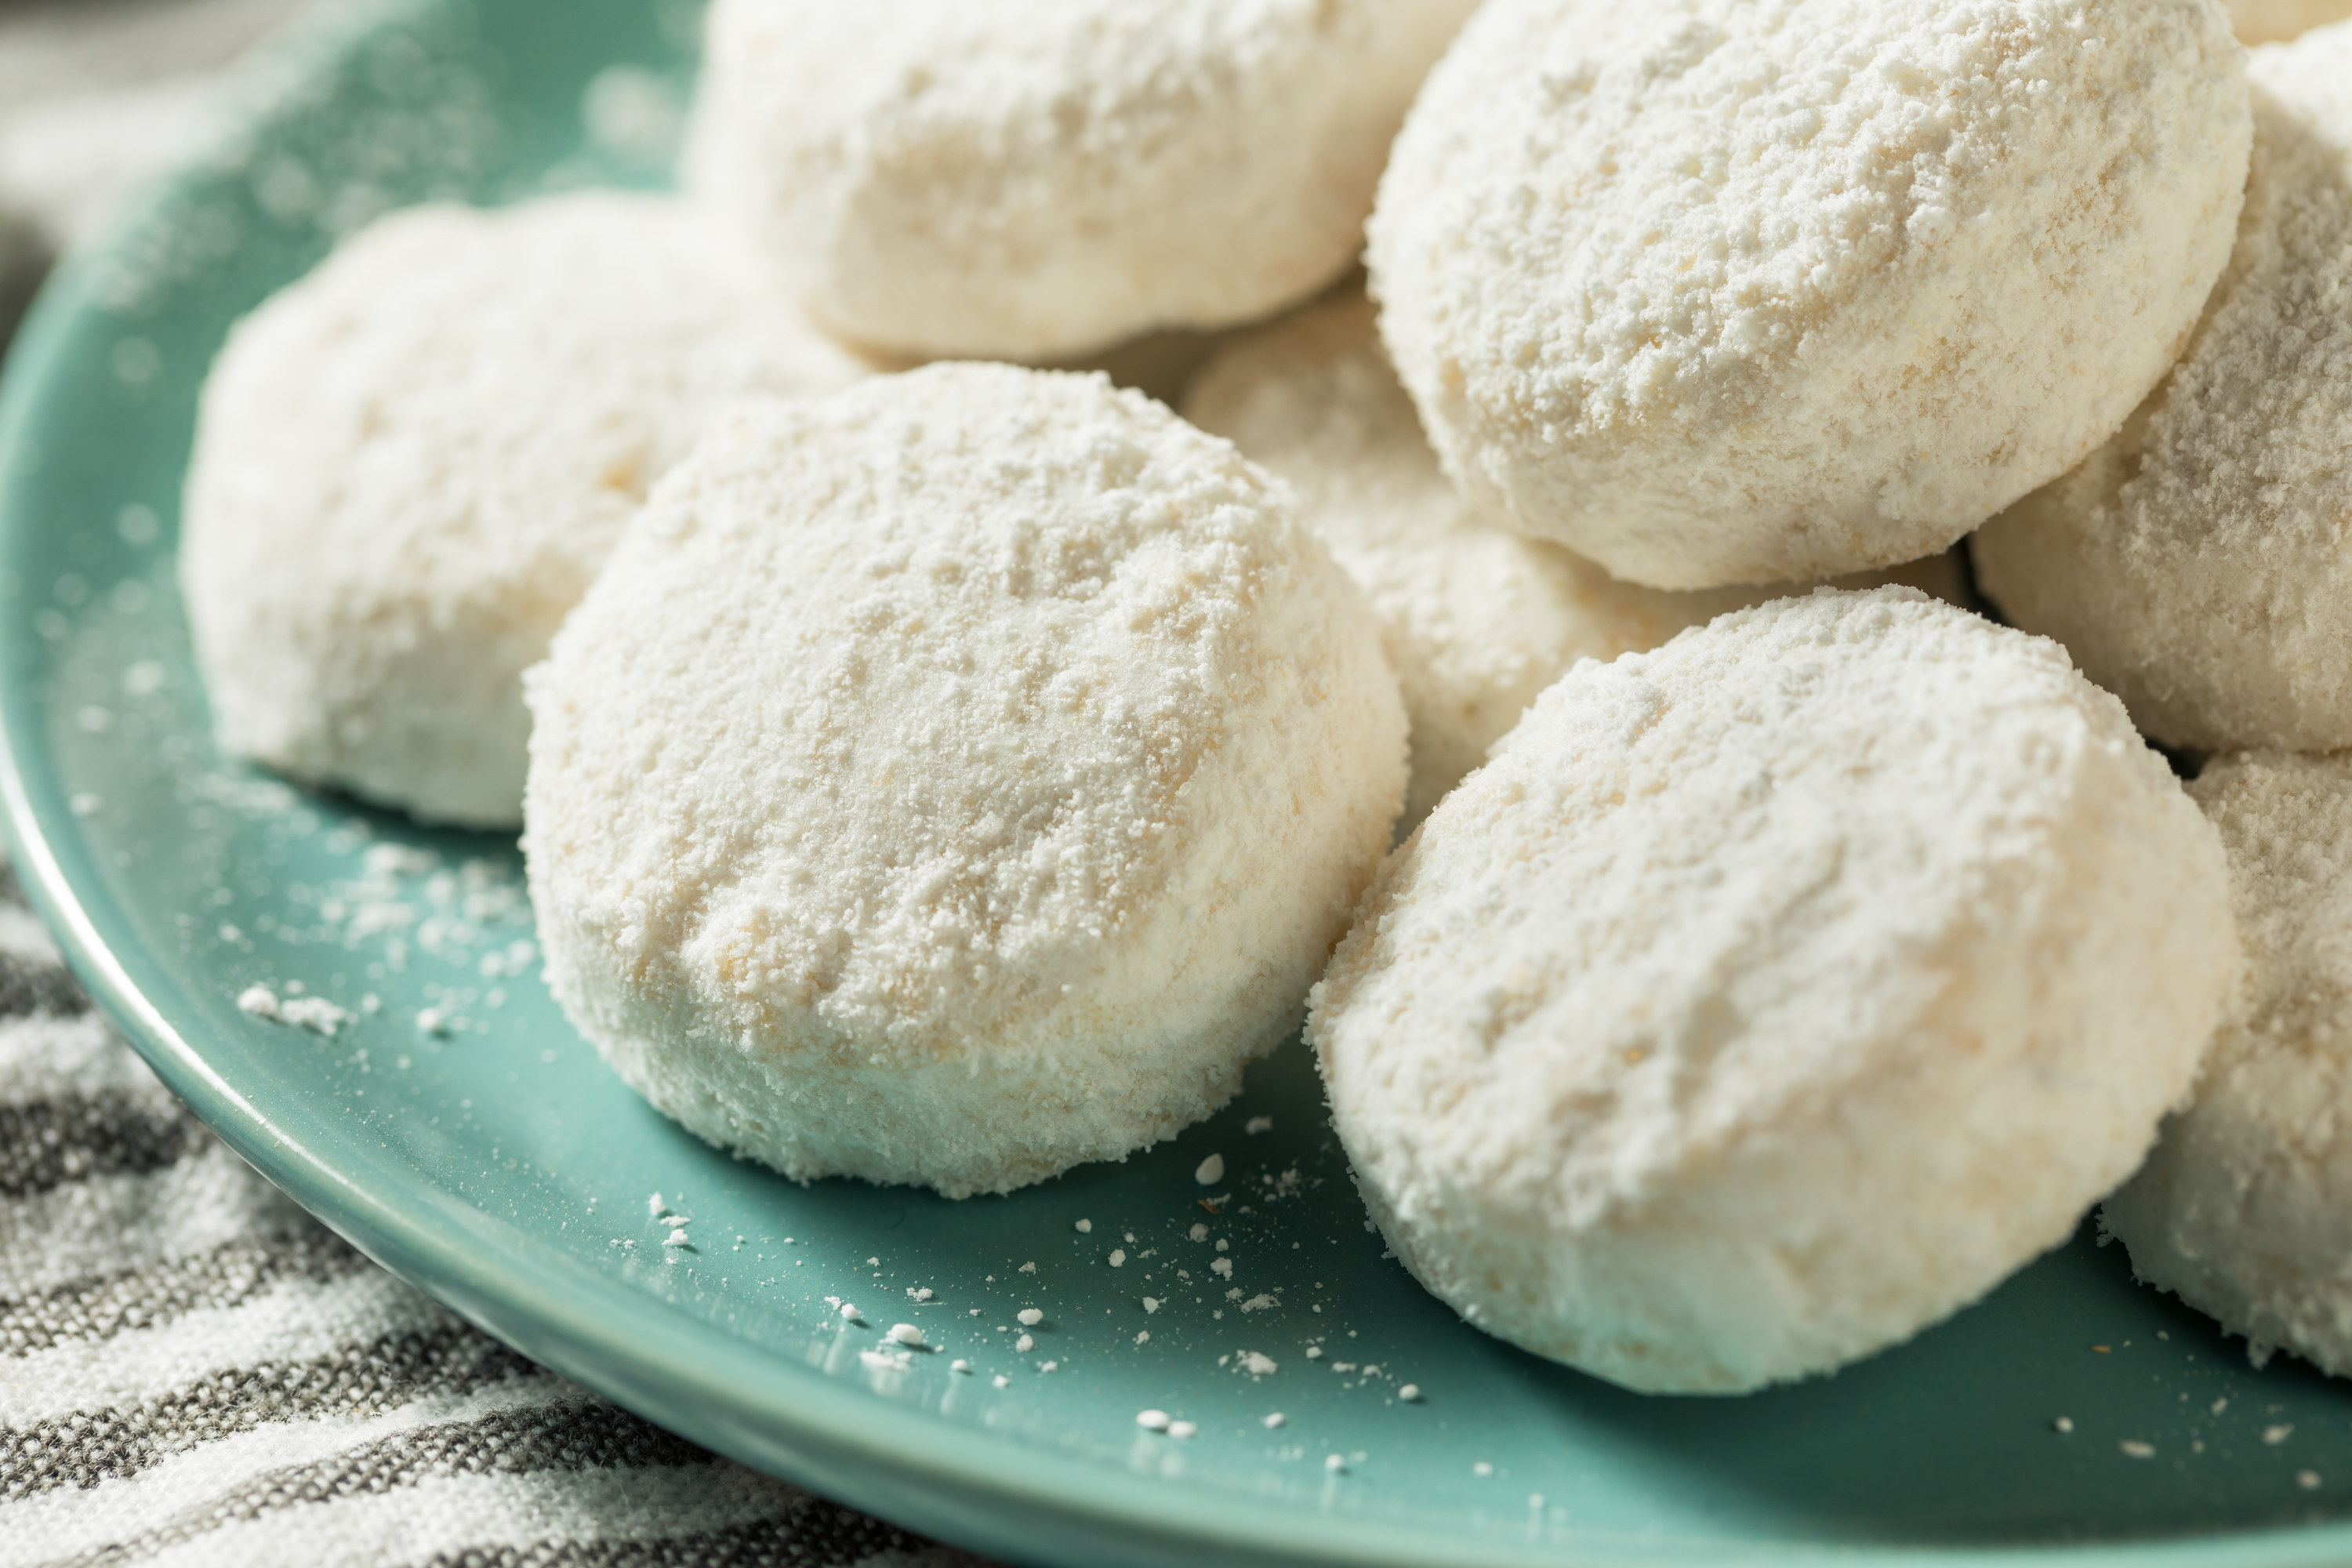 A plate of powdery Mexican wedding cookies